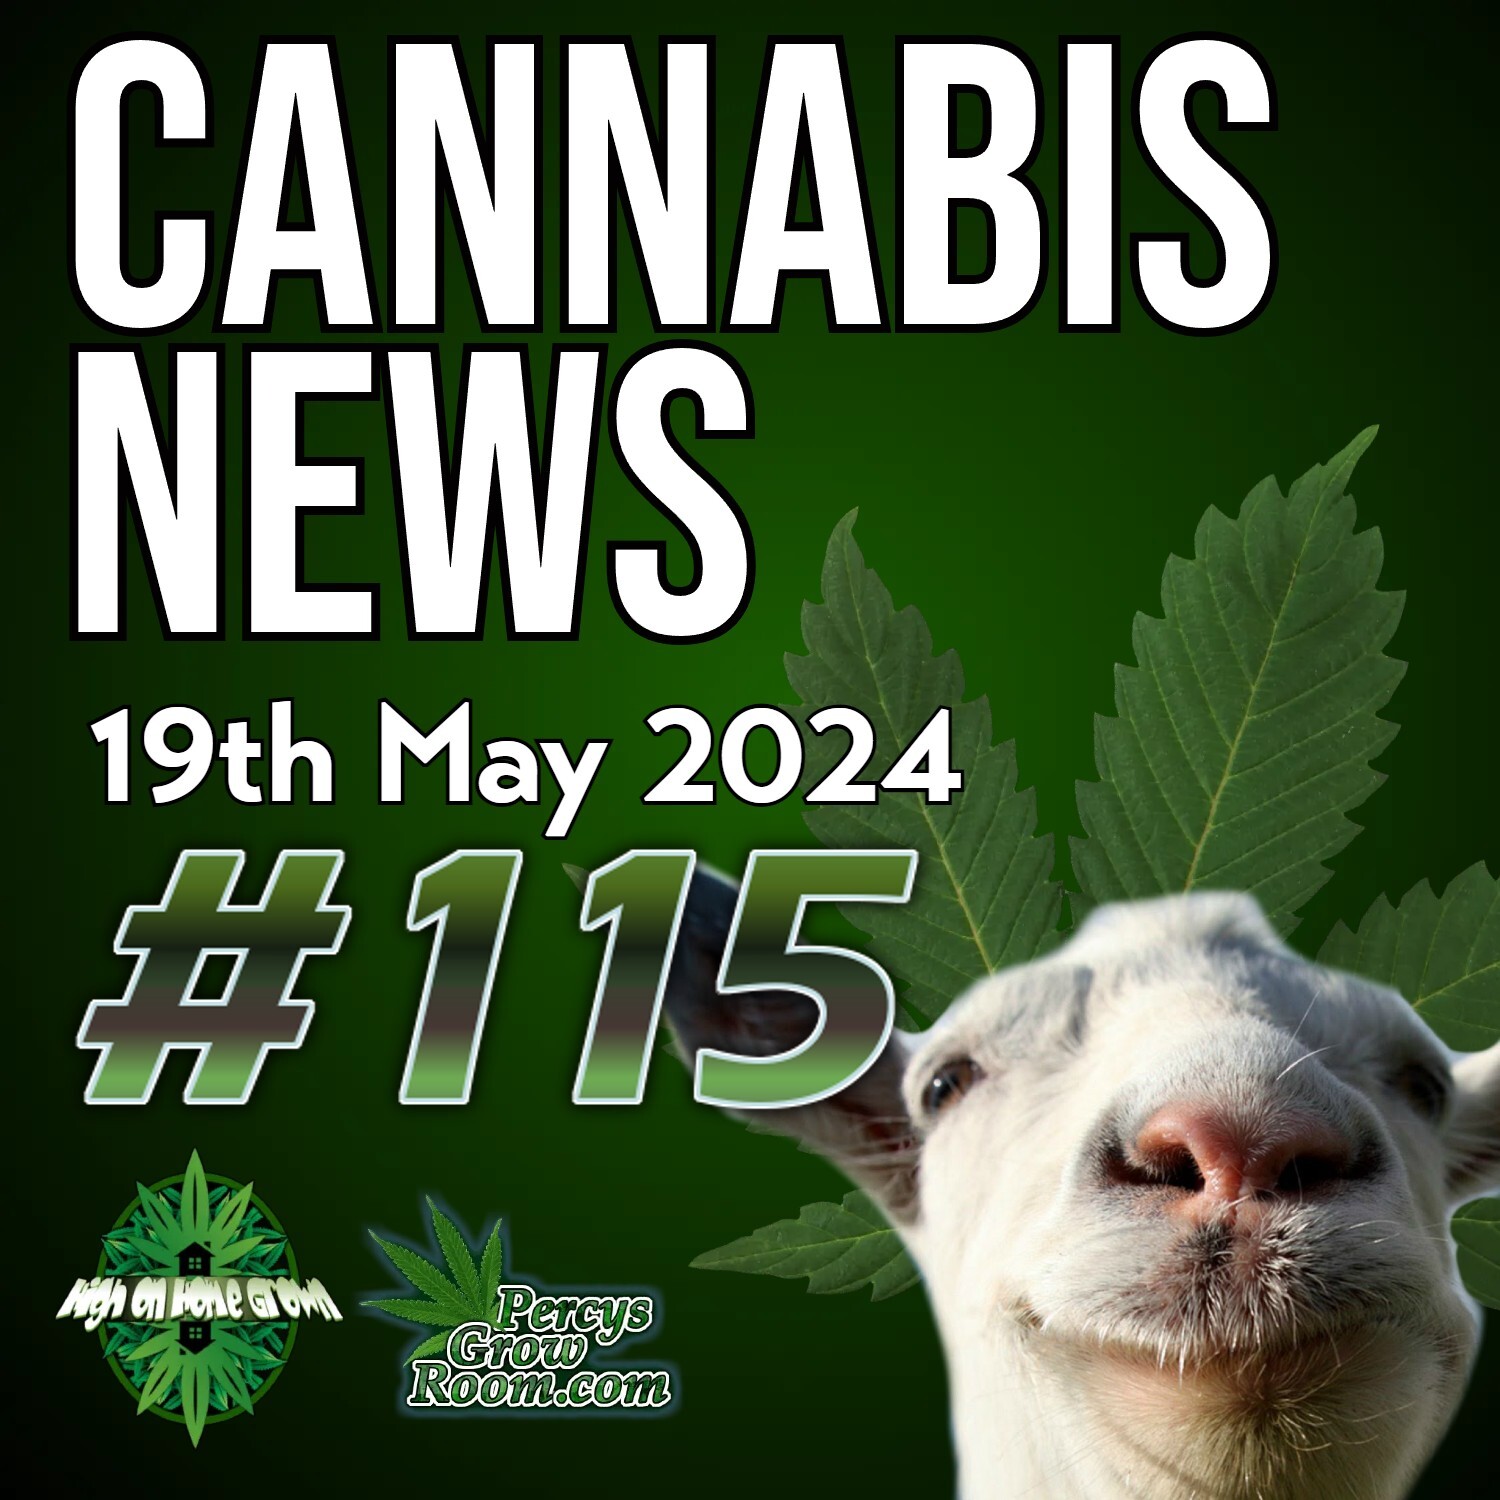 UK Urges People to Call Police on Cannabis Users, Whilst Medical Use Surges! | New York to Shut Down 75 "Illegal" Cannabis Shops | Minnesota Growers Can Sell Their Home grow? | Cannabis News 115